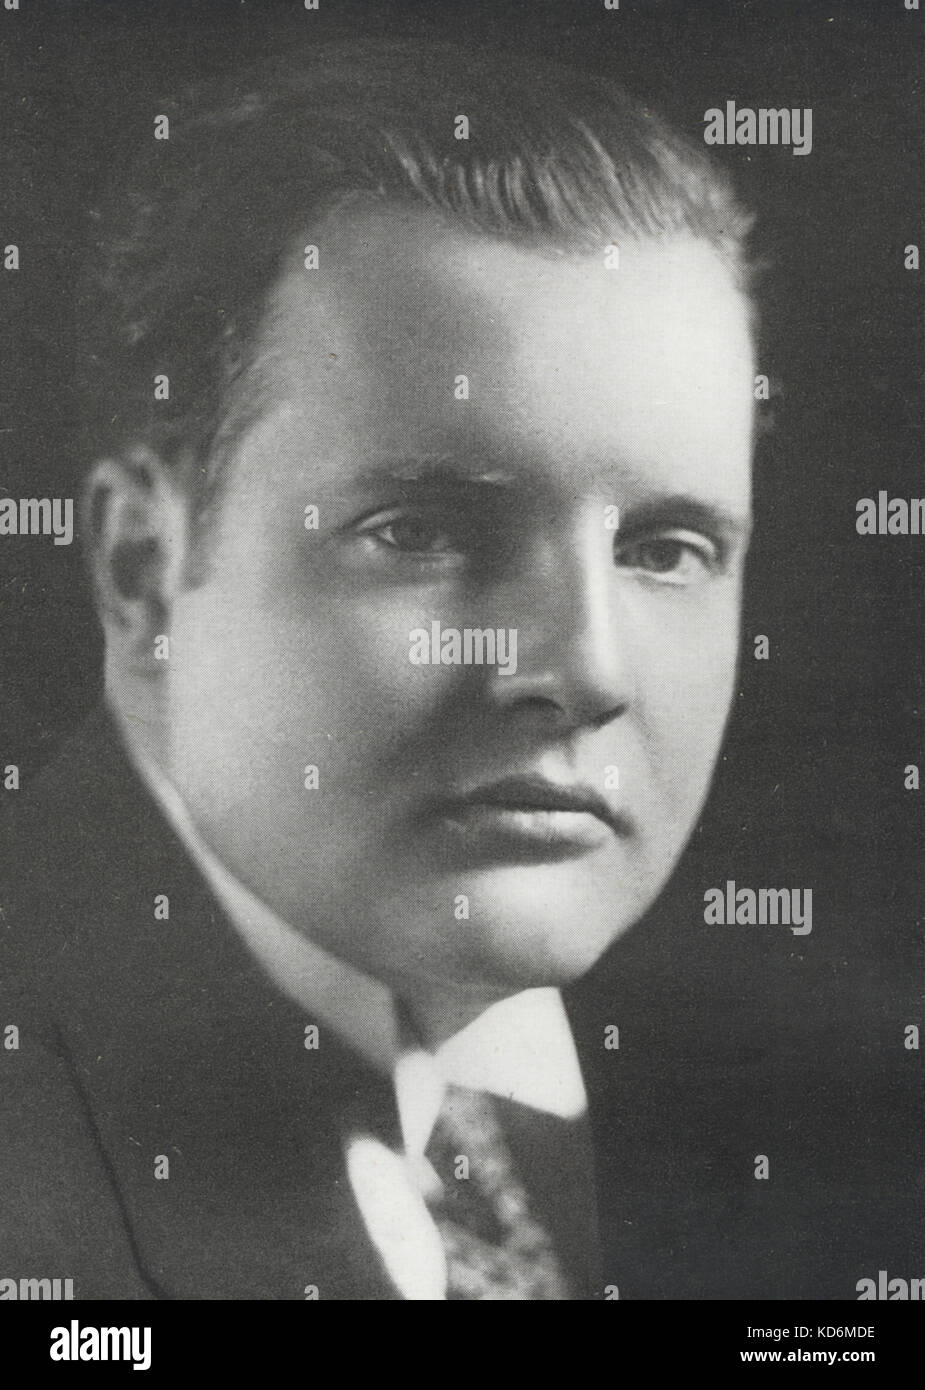 Constant Lambert portrait. English composer, conductor and writer on music, 23 August 1905 - 21 August 1951. Stock Photo